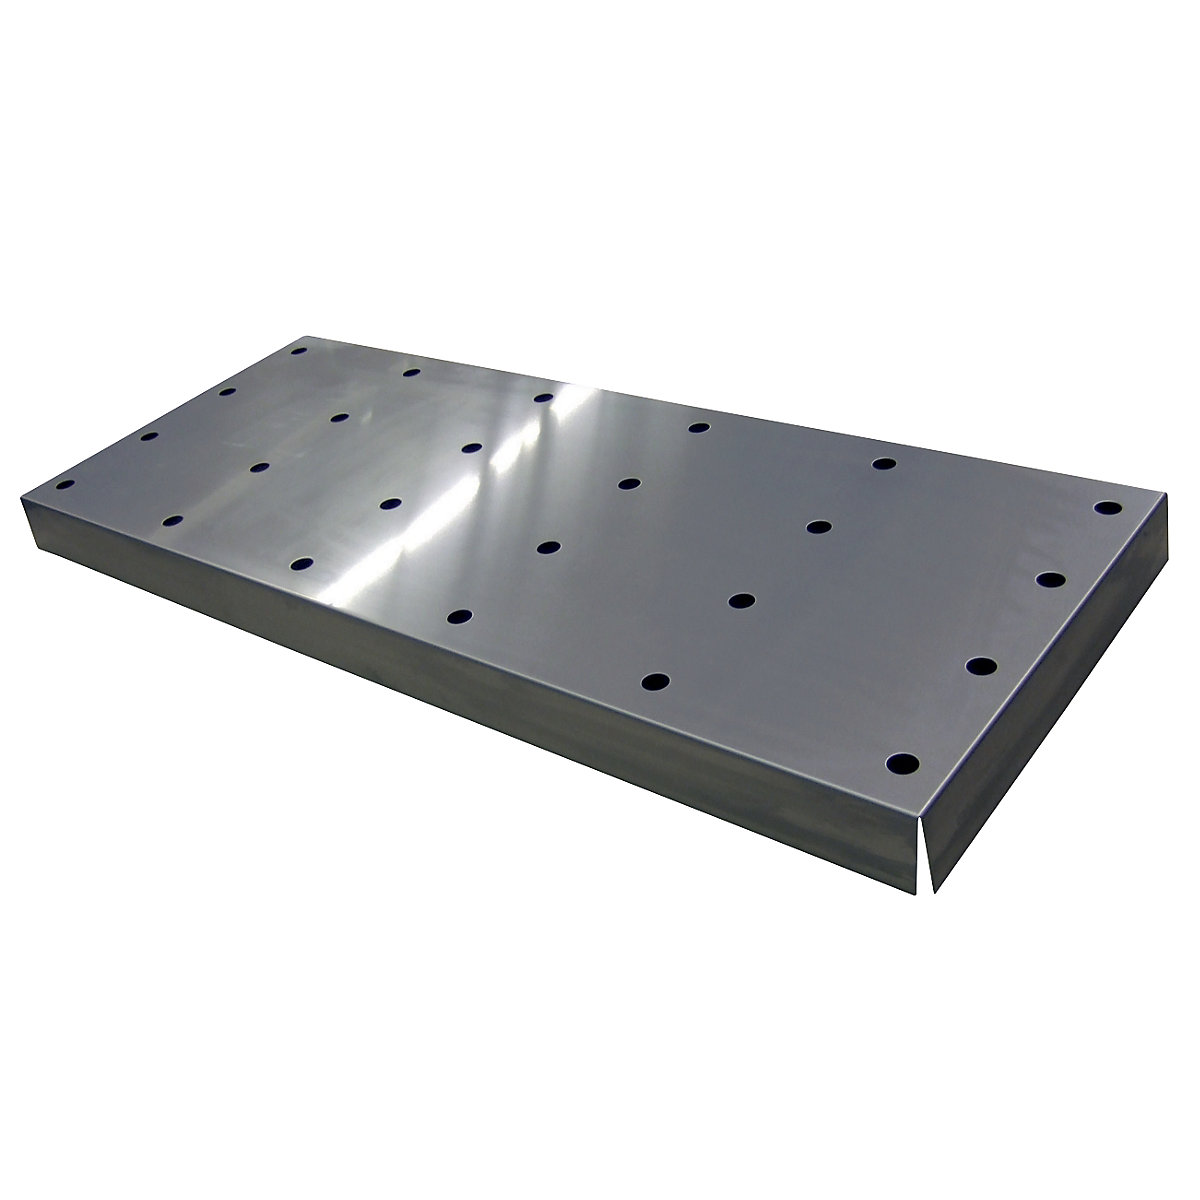 Perforated metal cover for base sump tray – asecos, WxDxH 1025 x 415 x 60 mm, stainless steel-1